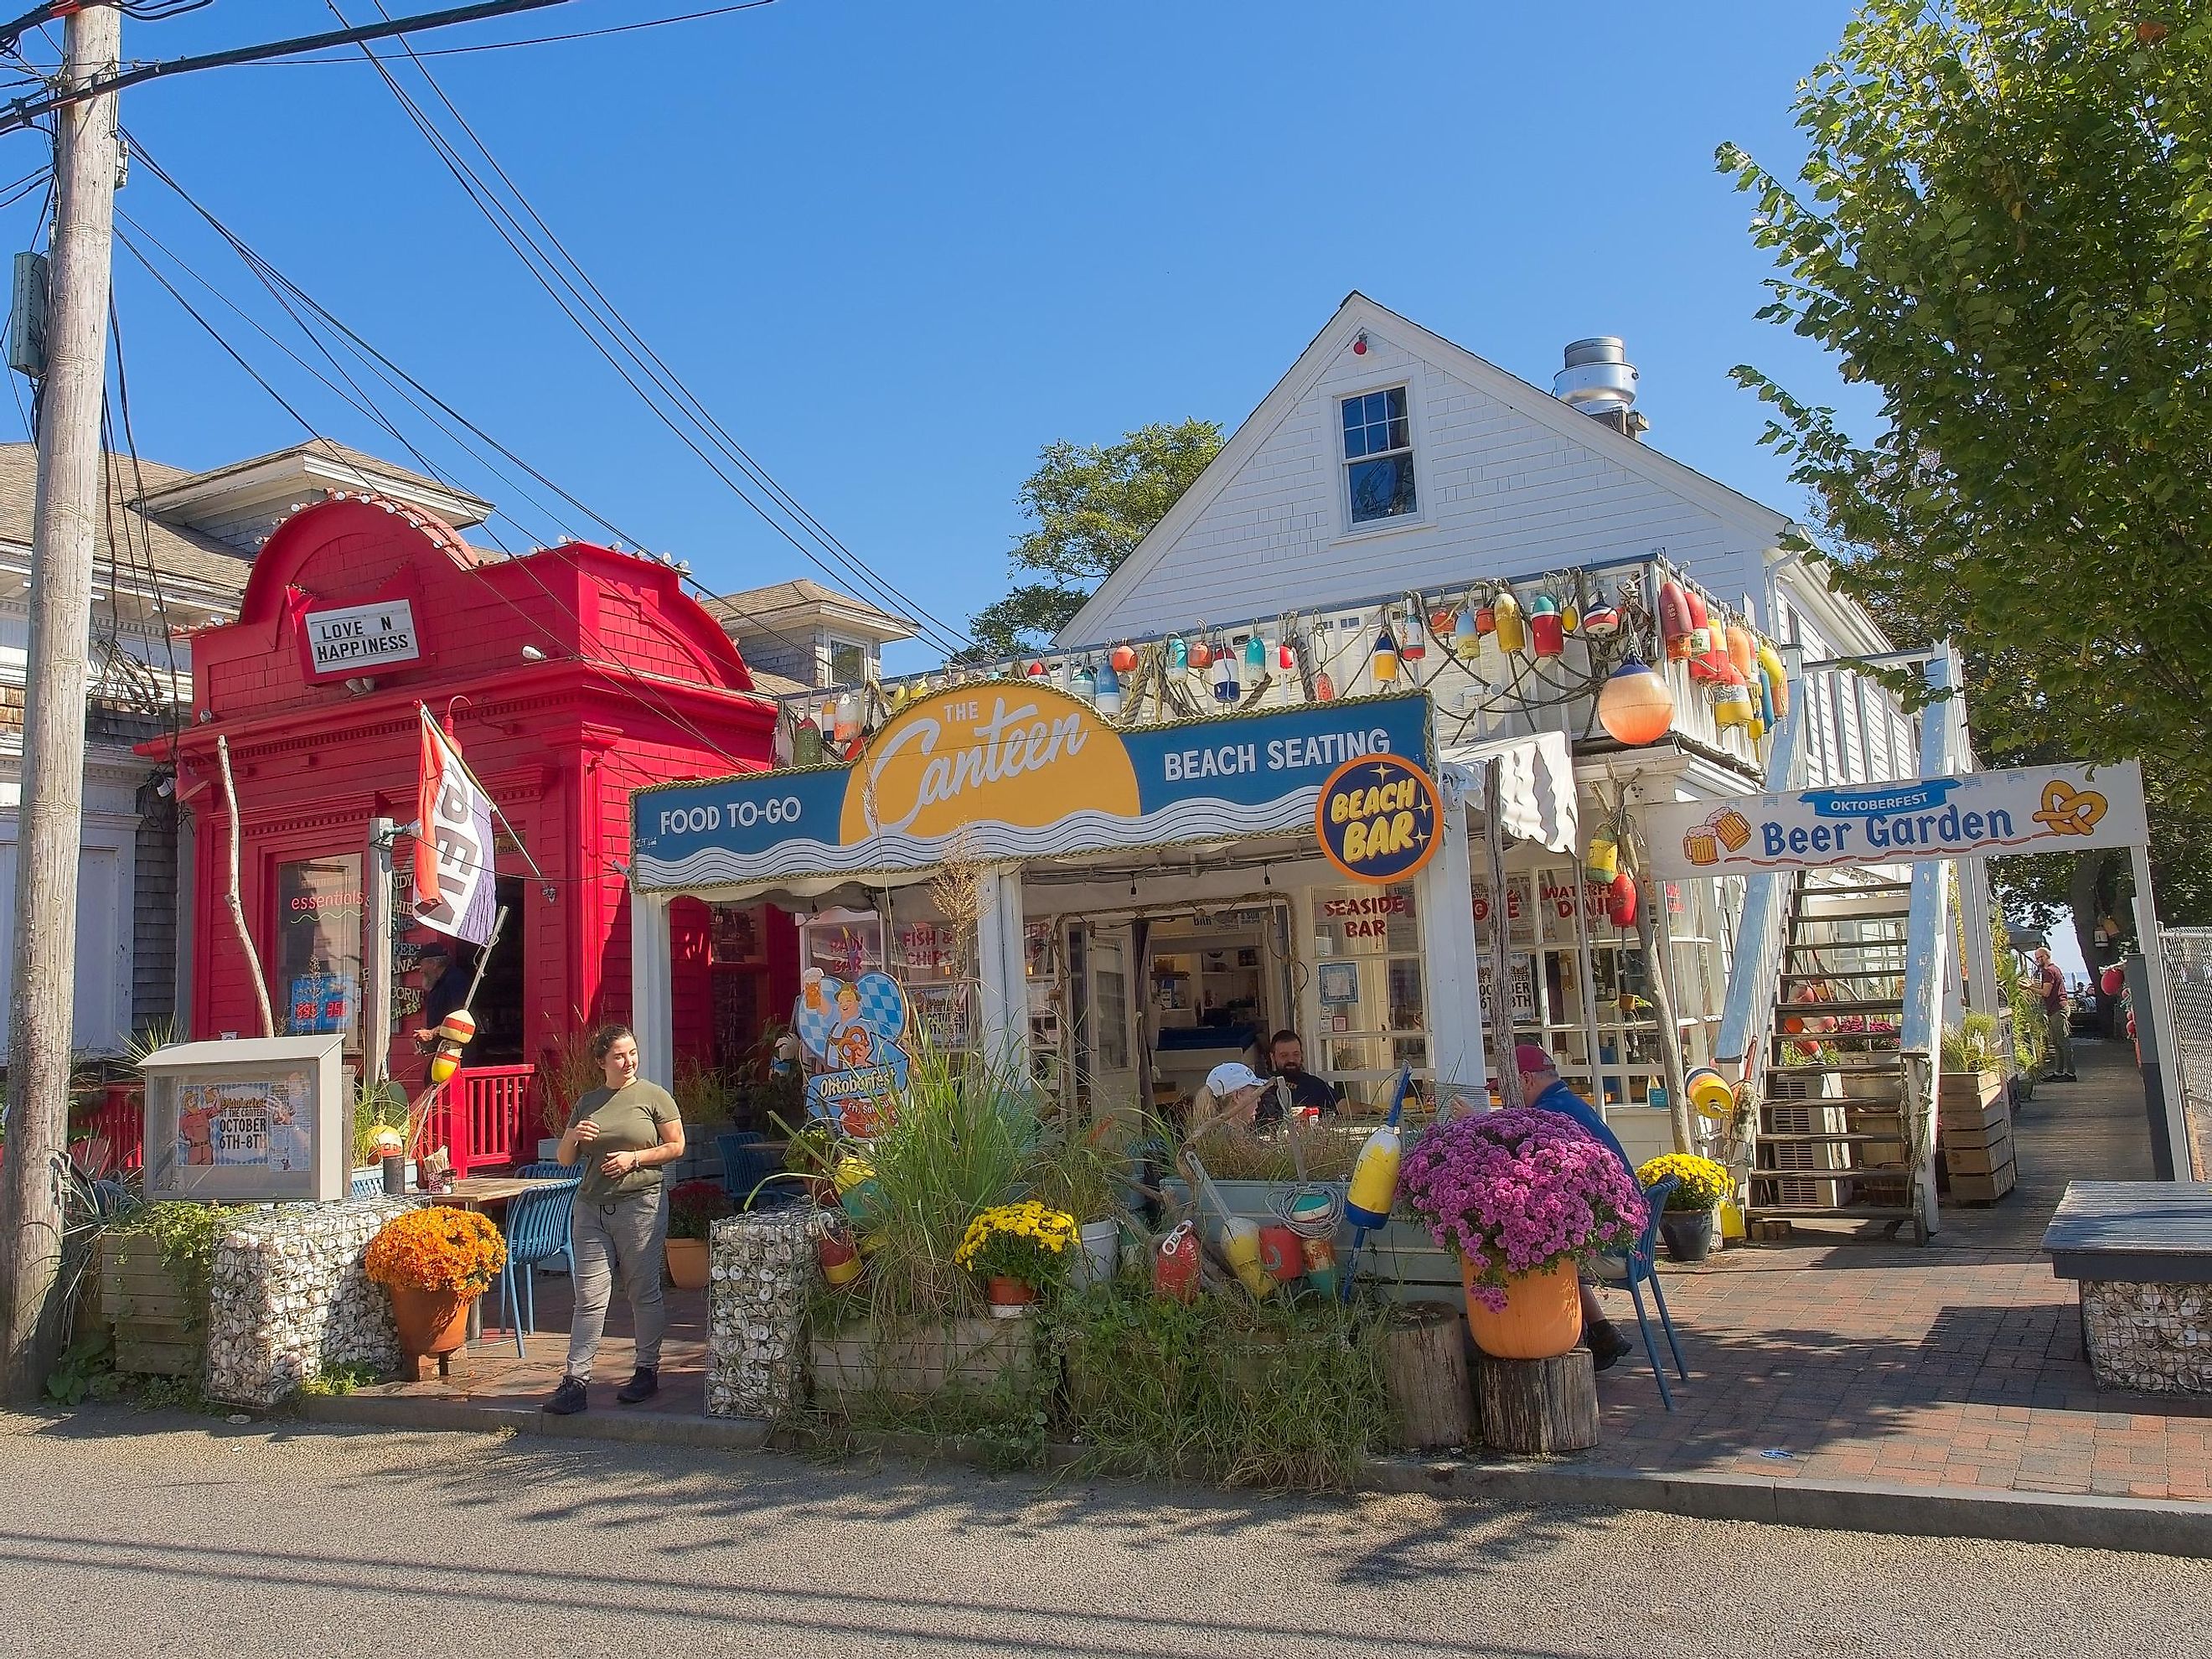 Busy shops and tourists in old town Provincetown, Cape Cod, Massachusetts, via Peter Blottman Photography / iStock.com